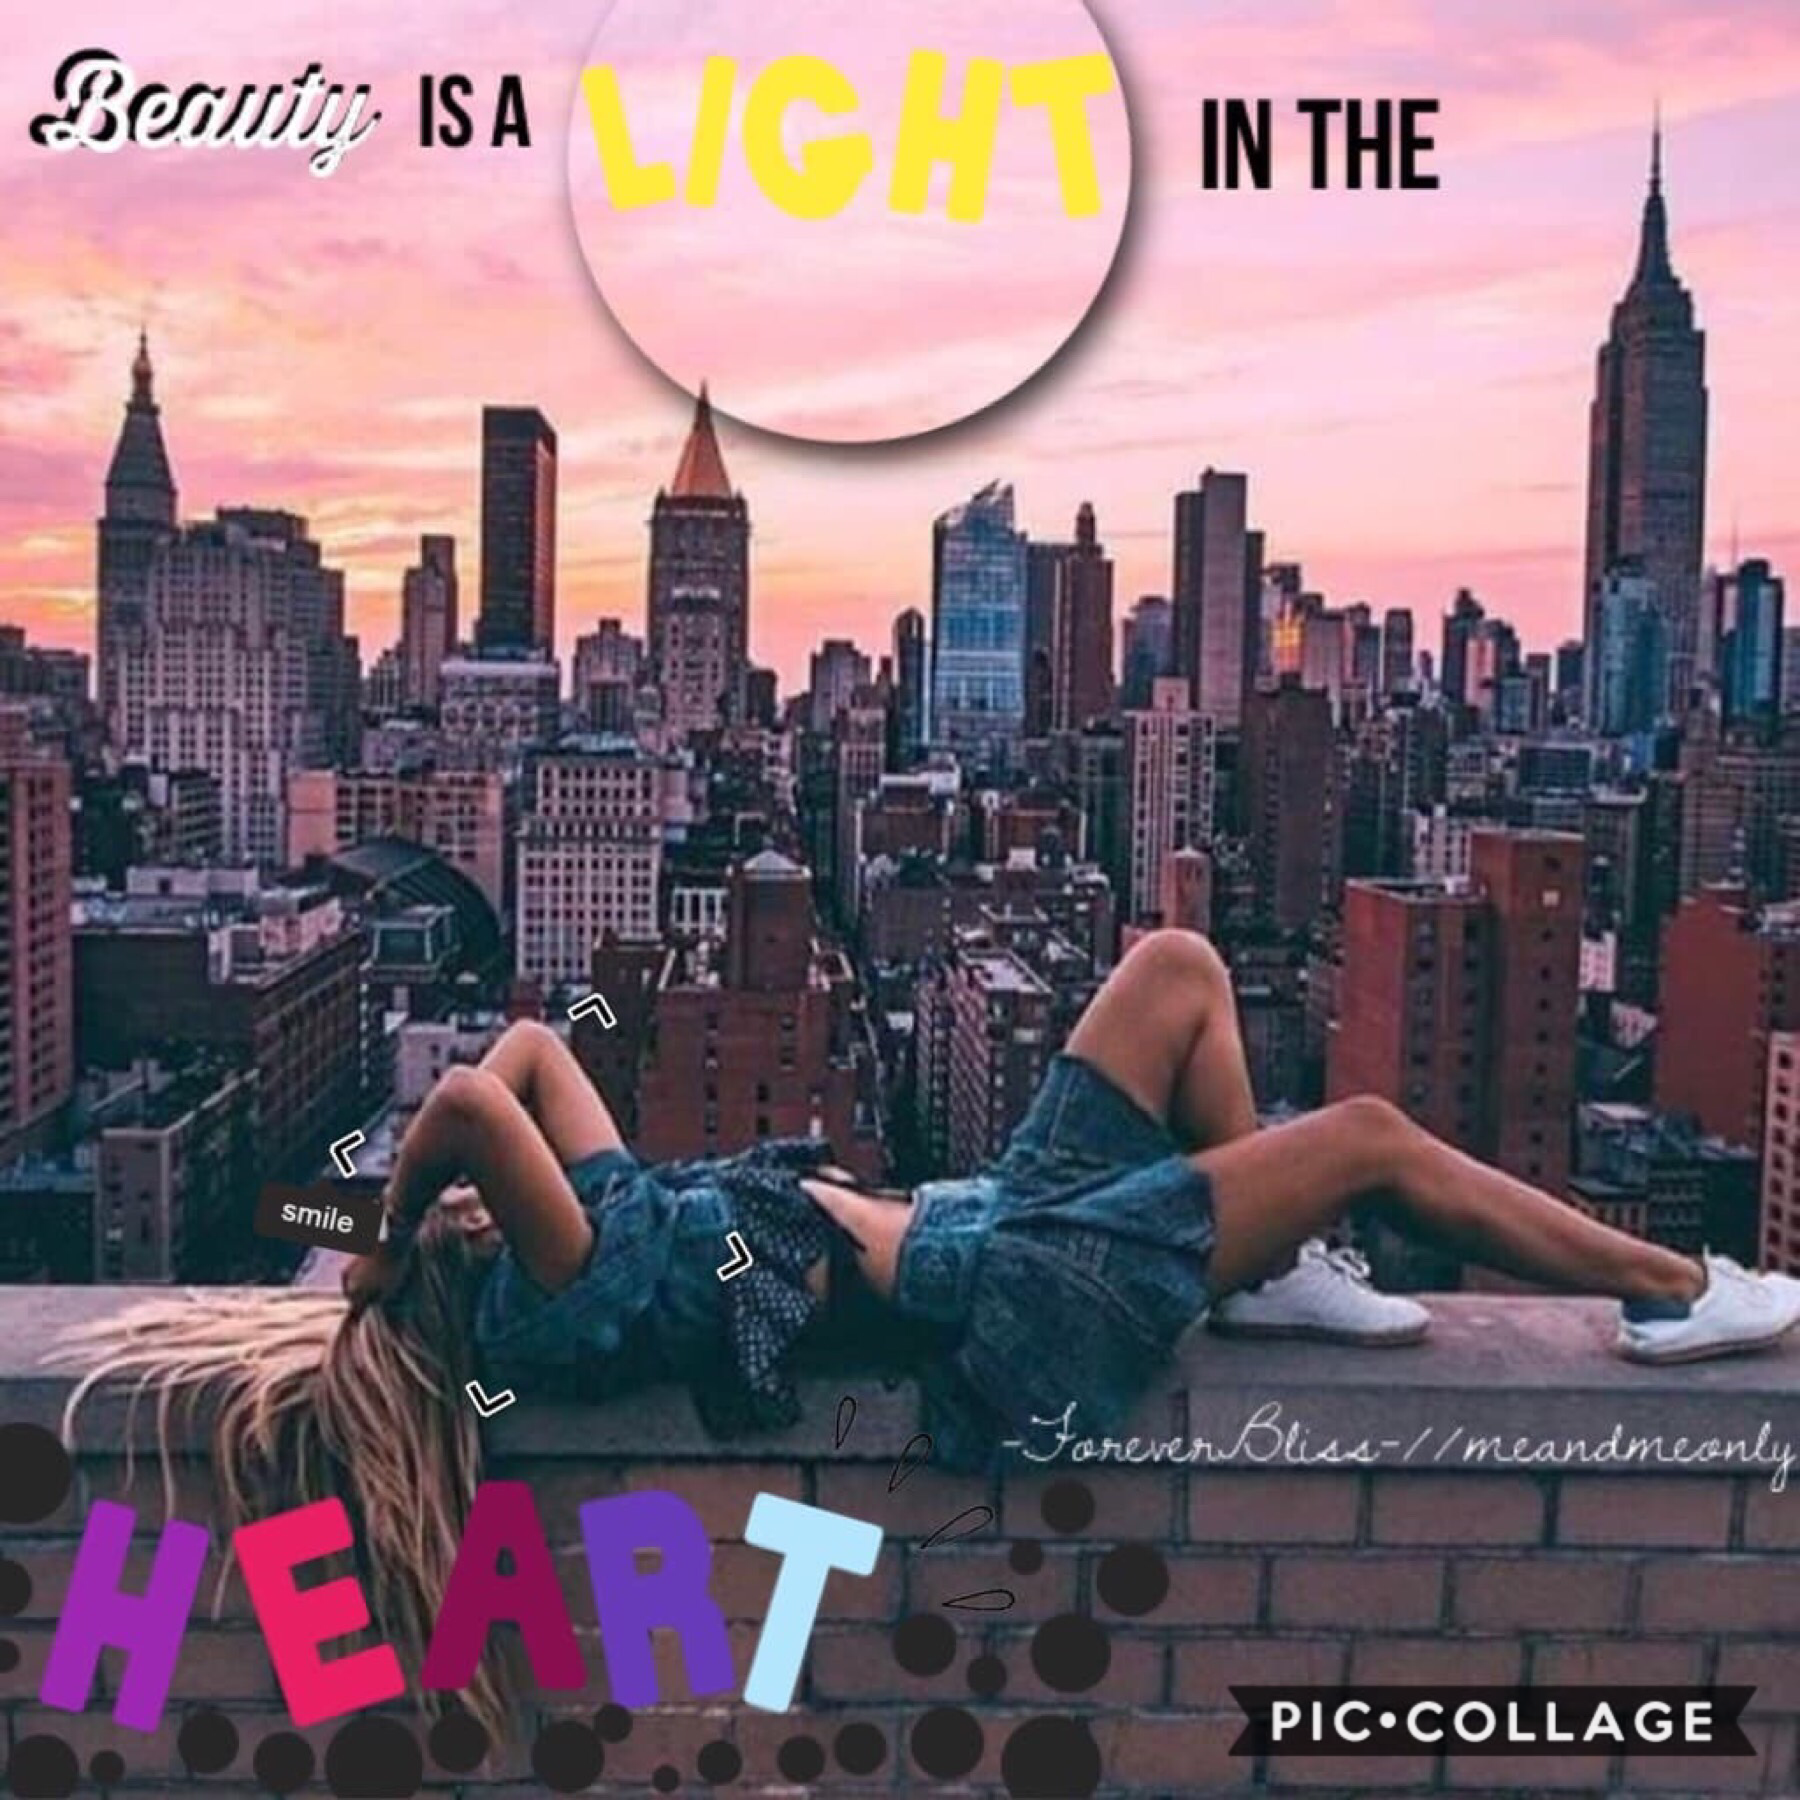 collab.....
with the awesome -ForeverBliss- everyone go follow her, she makes the best collages. so fun collabing with you. comment below if you want to collab. please go like my recent ❤️